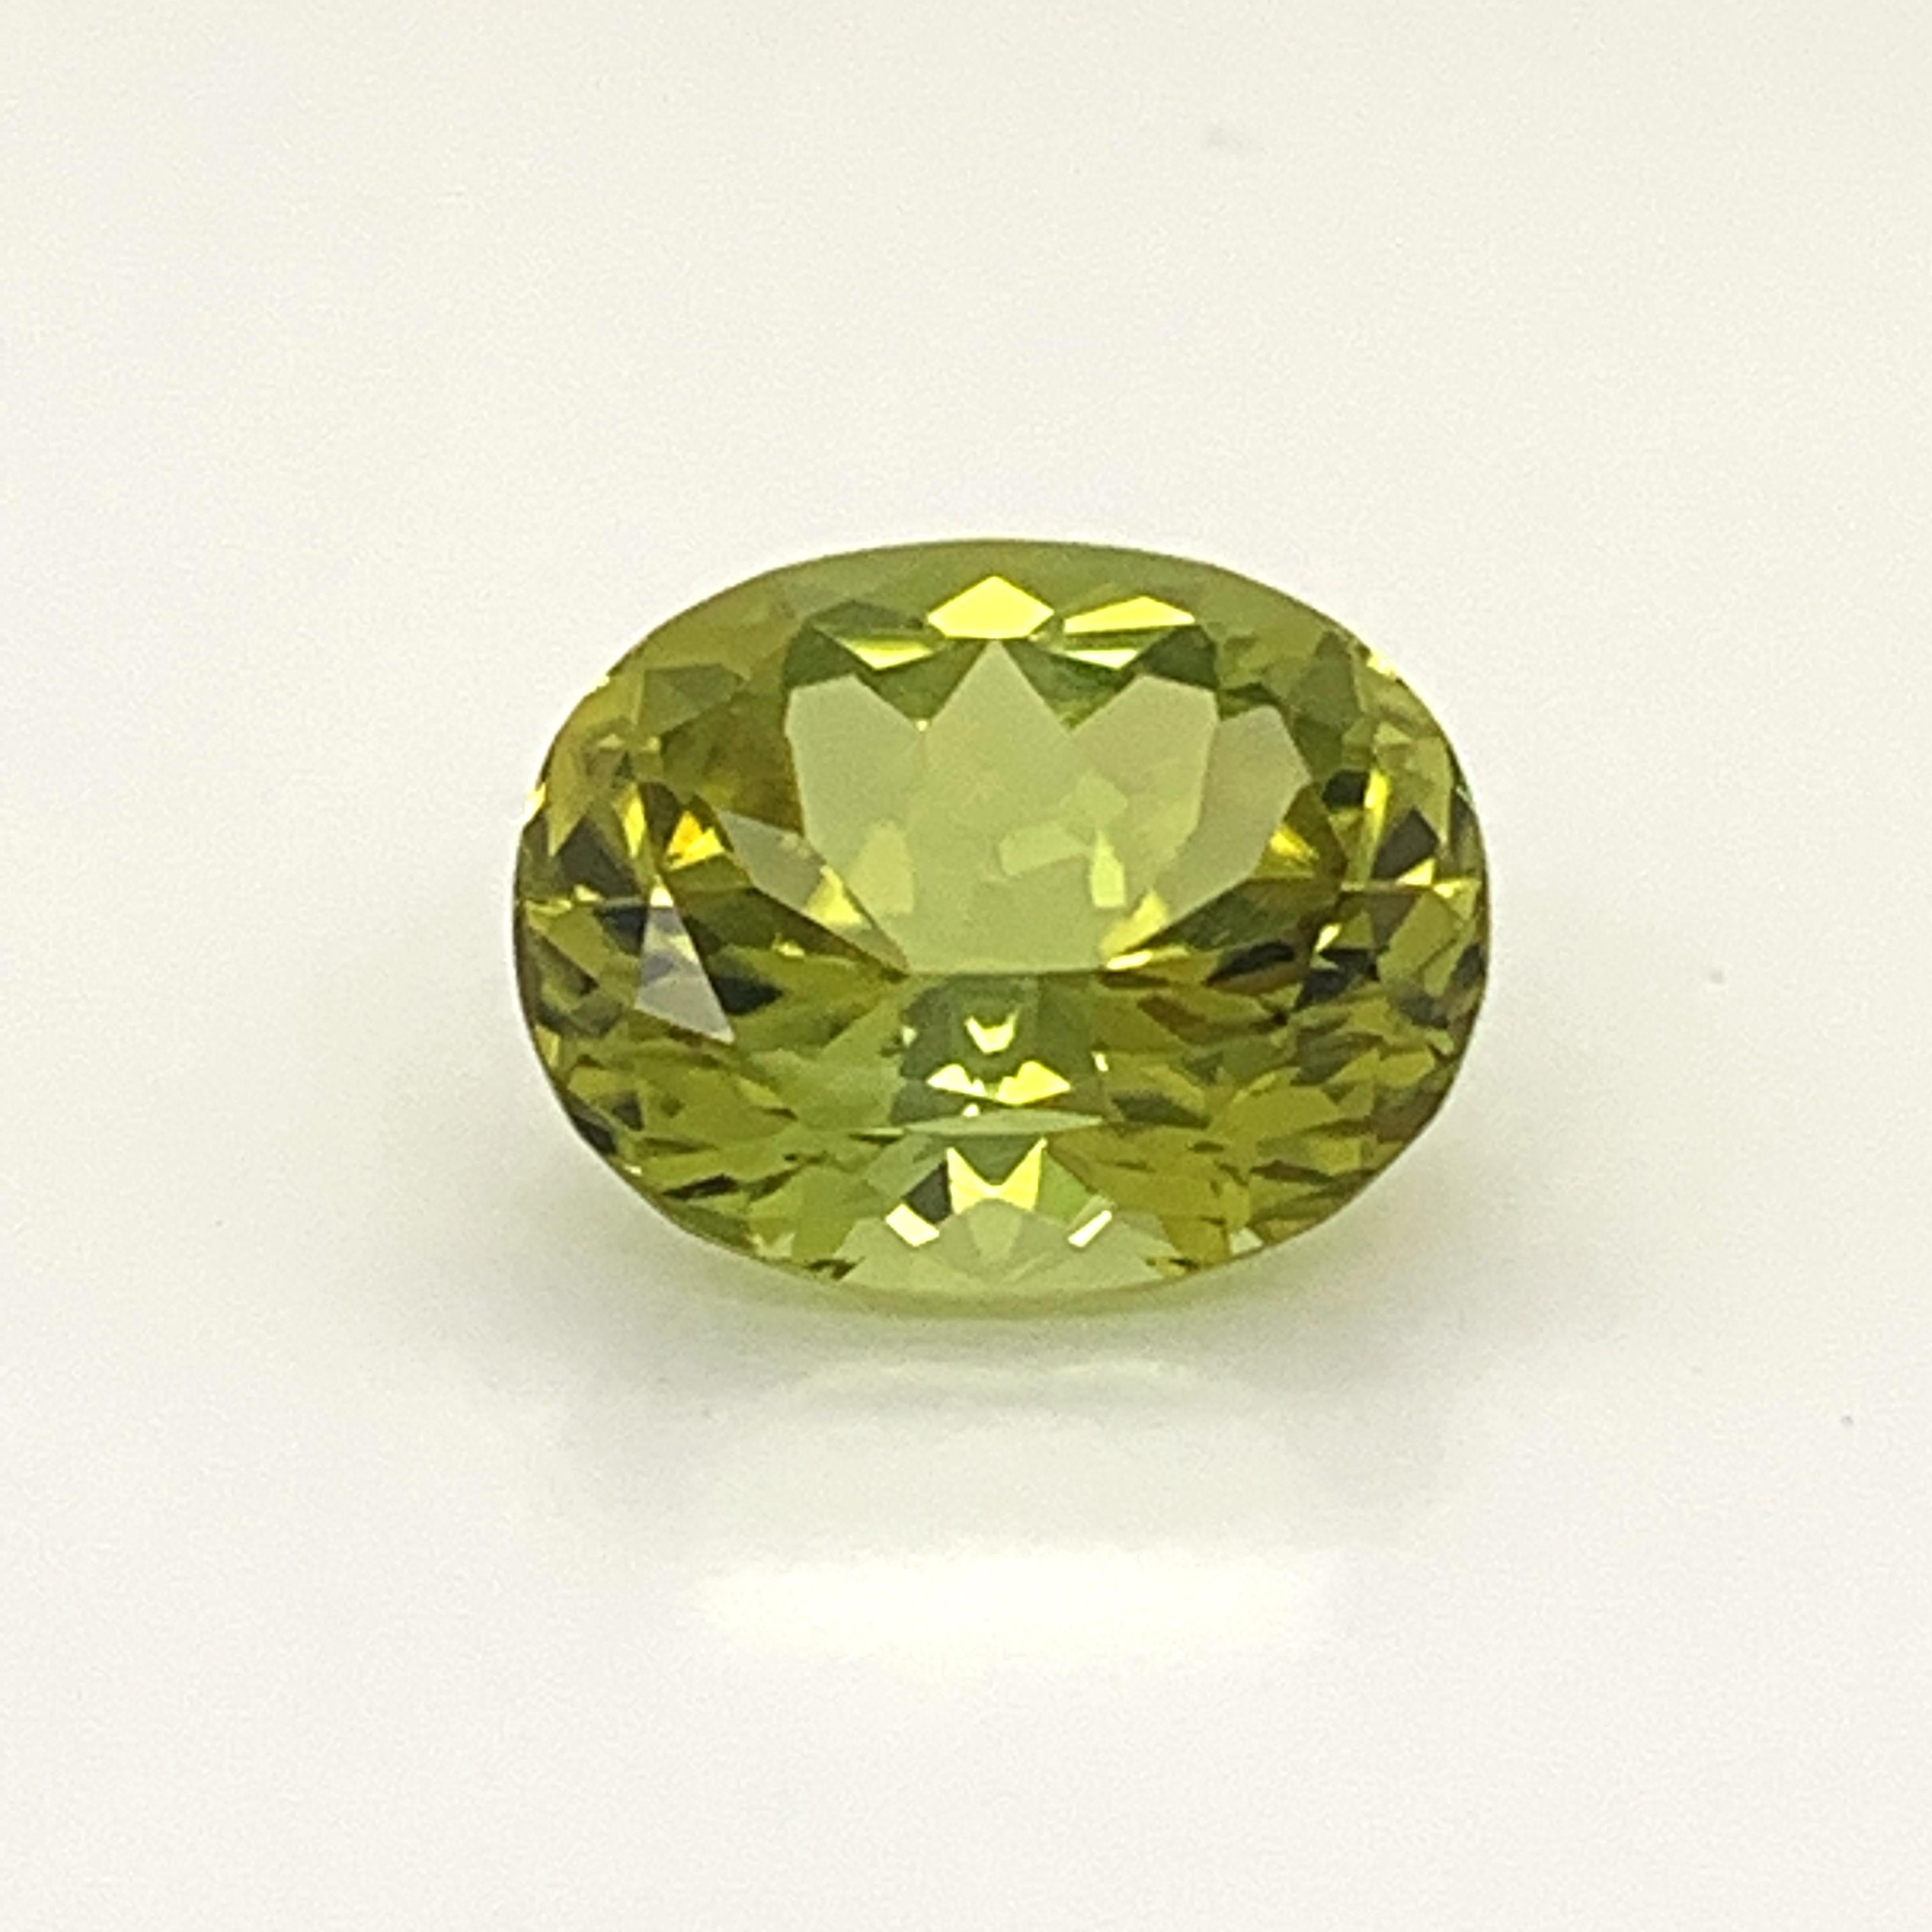 Canary Tourmaline oval cut stone weighing a total of  7, 10 Carats, offered loose to create an unique design or a top piece for a tourmaline collector.
The mine of this tourmaline has been discovered in the early 2000's years.

Dimension : 13.33 x